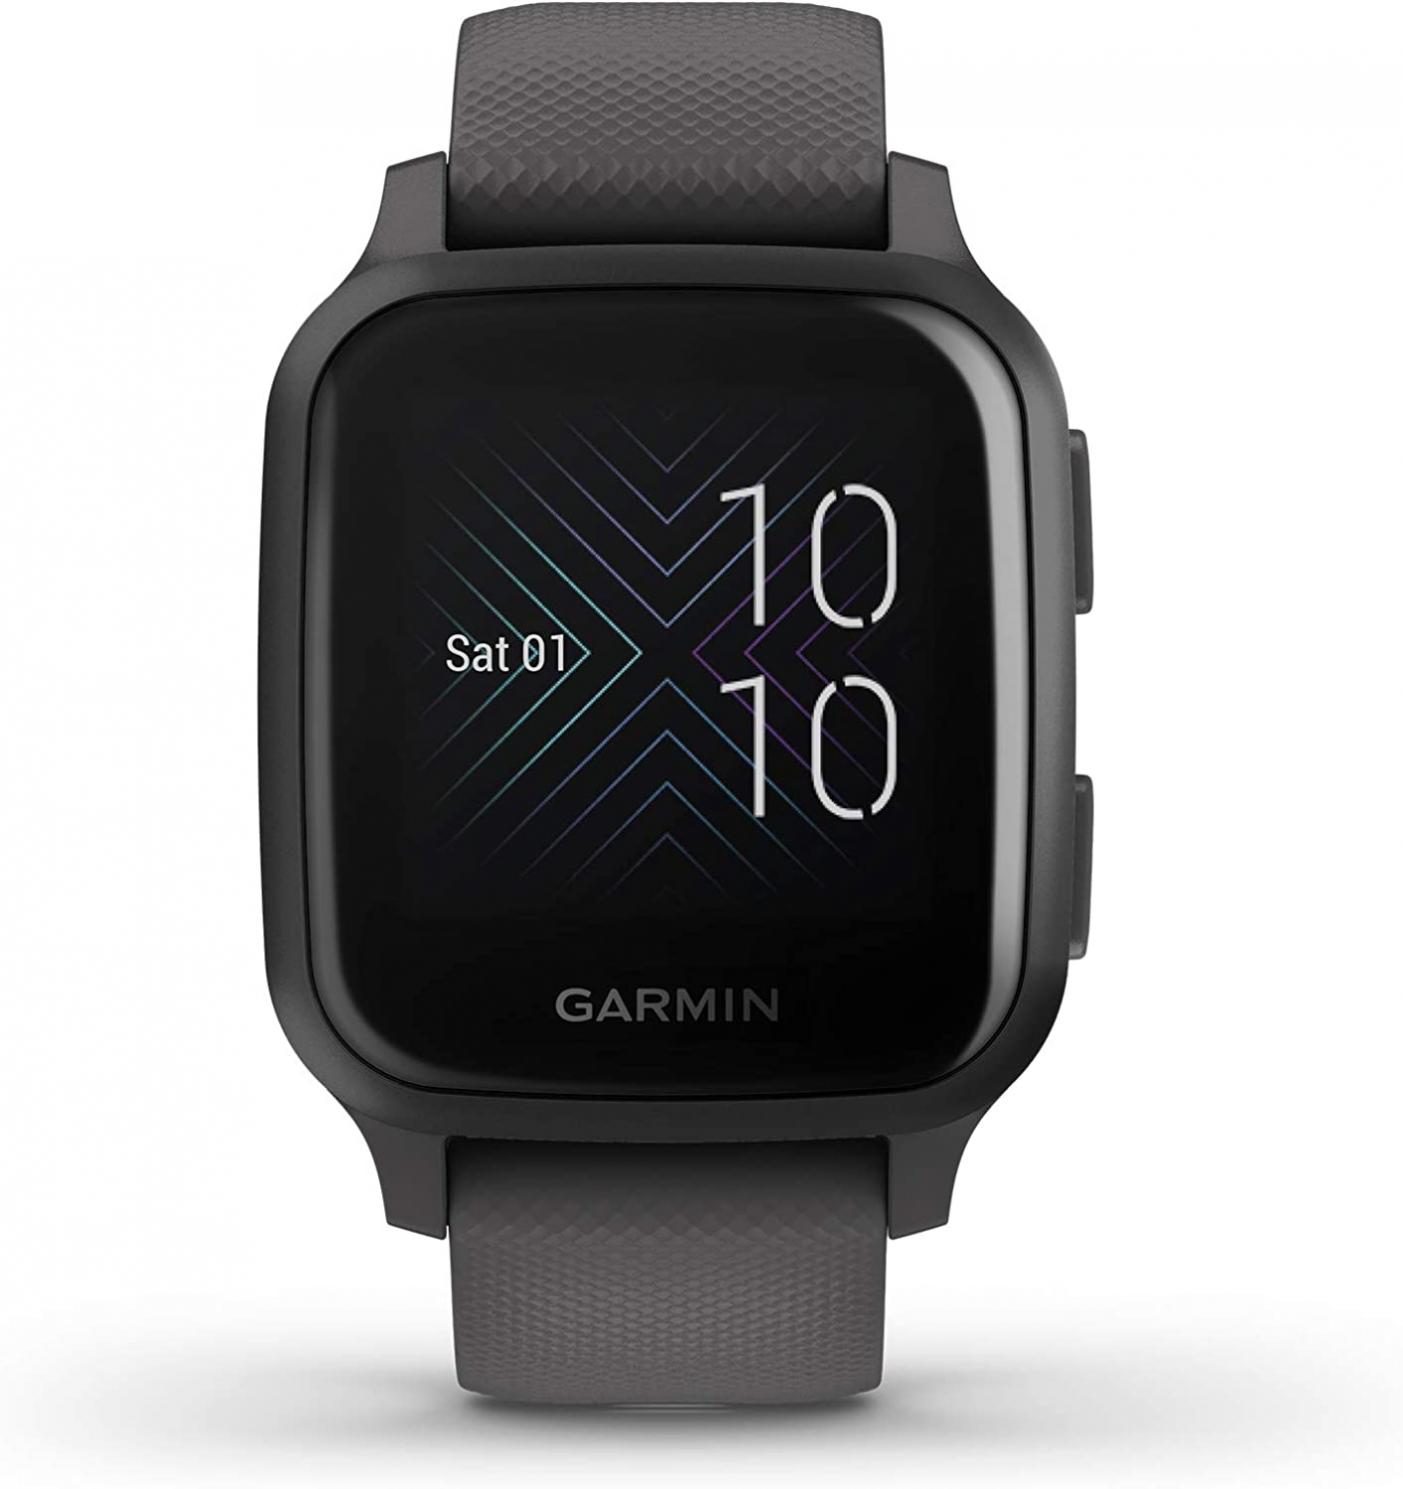 Garmin 010-02427-00 Venu Sq, GPS Smartwatch with Bright Touchscreen Display, Up to 6 Days of Battery Life, Slate (Renewed)